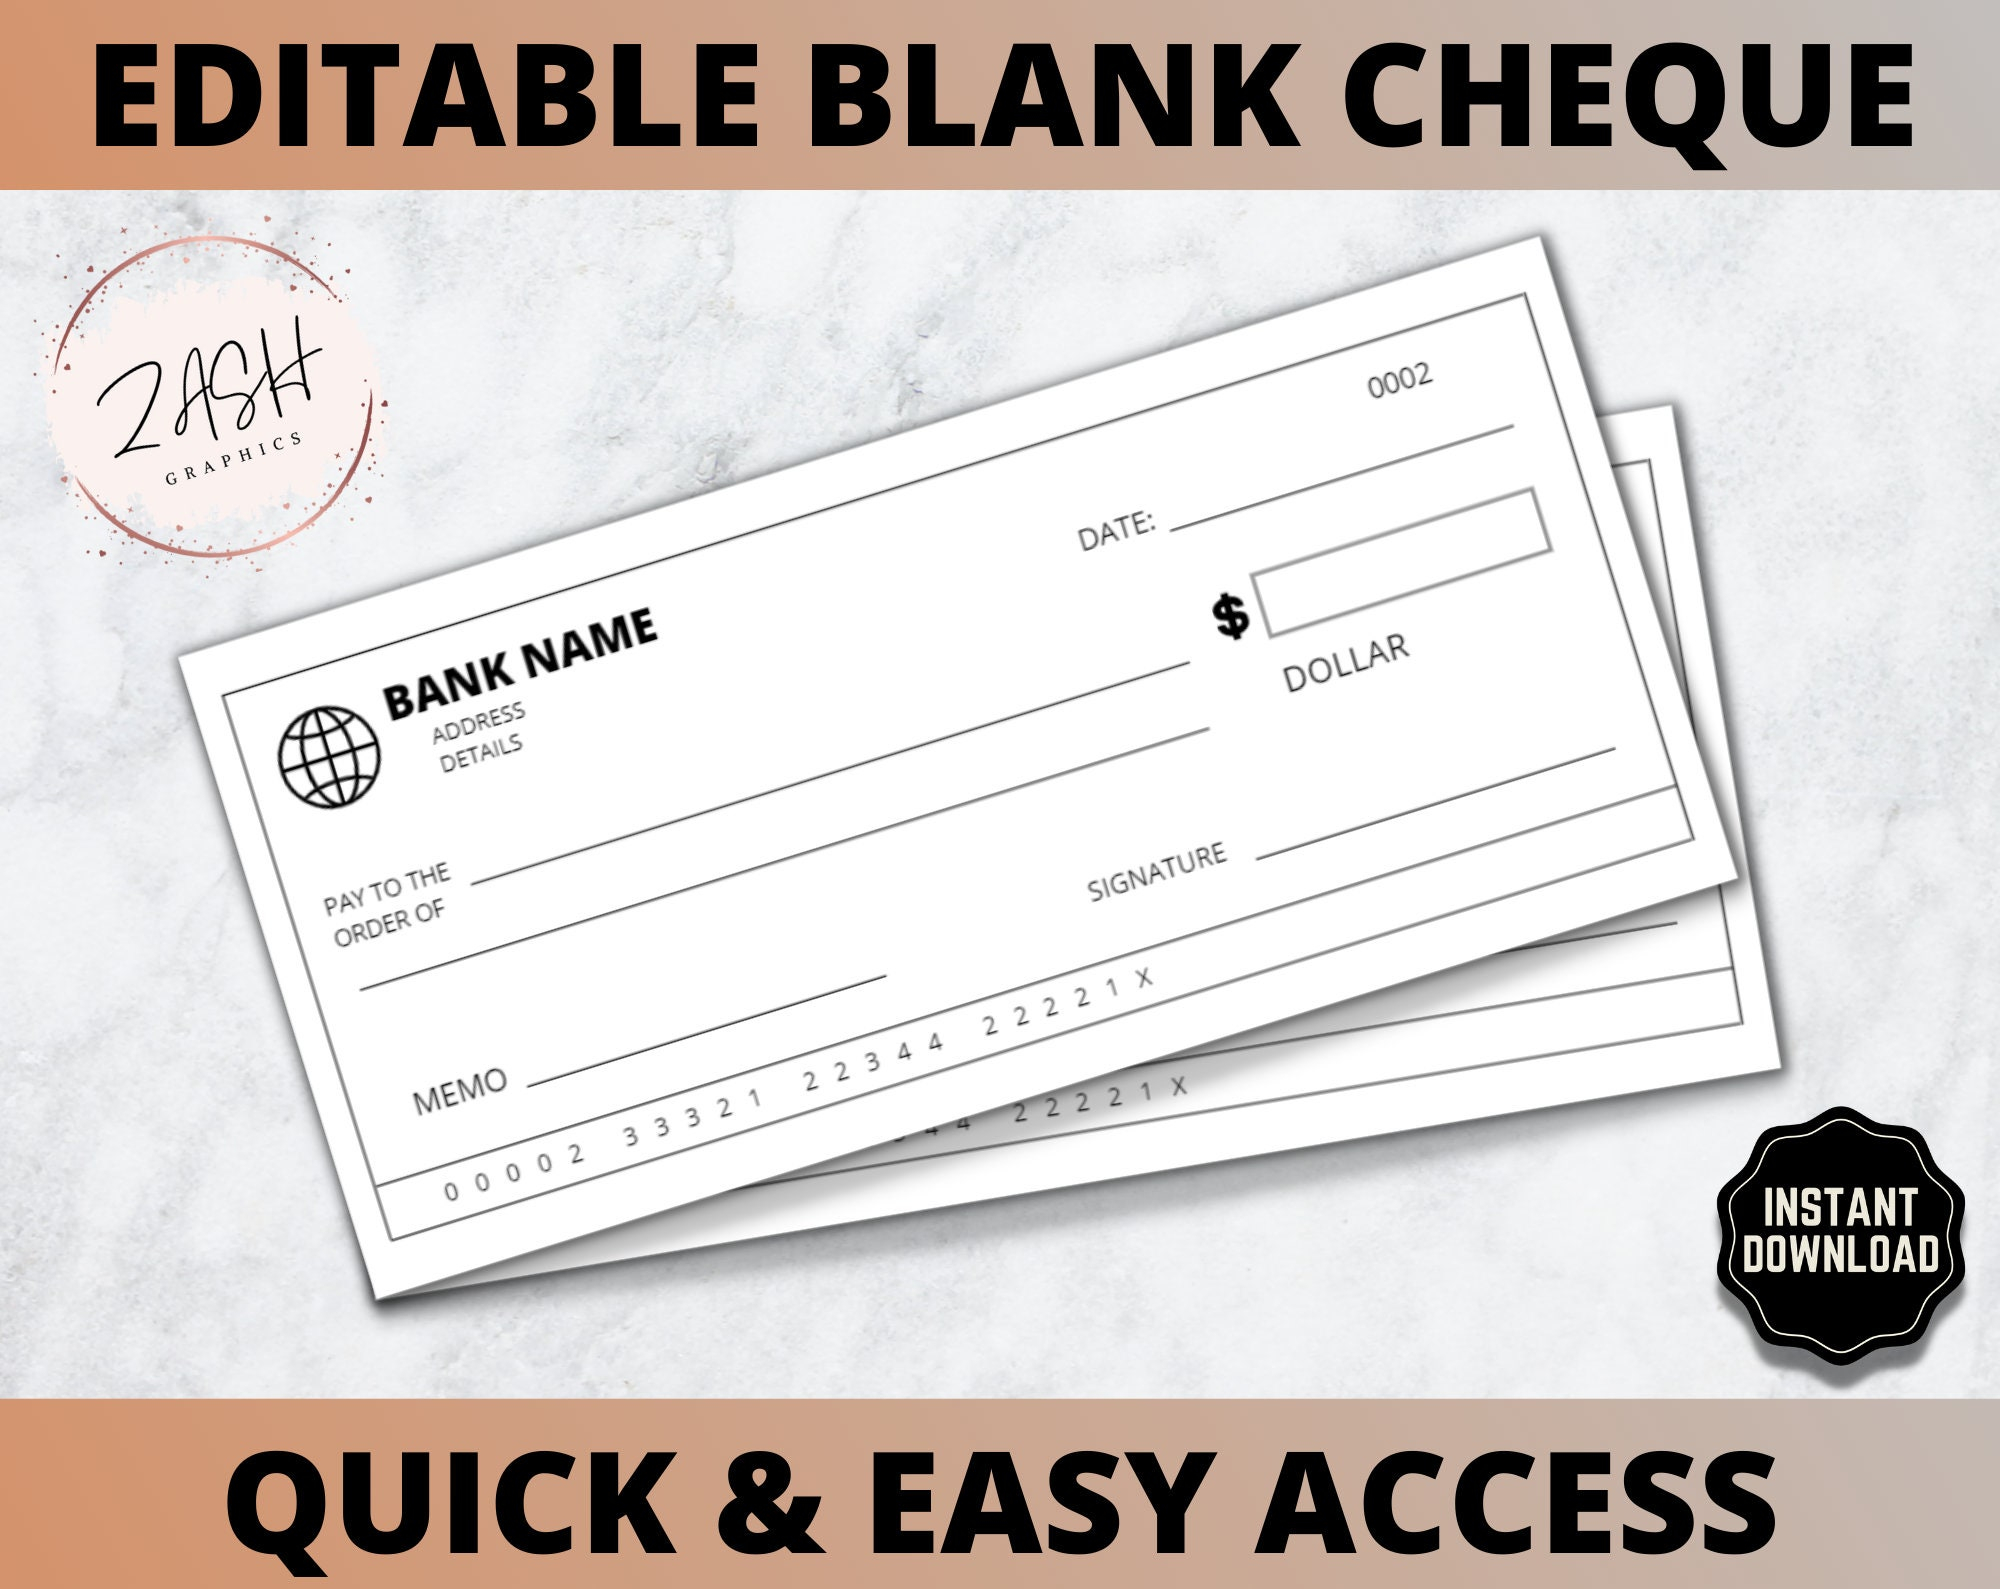 Blank Check Template - Etsy With Regard To Blank Check Templates For Microsoft Word